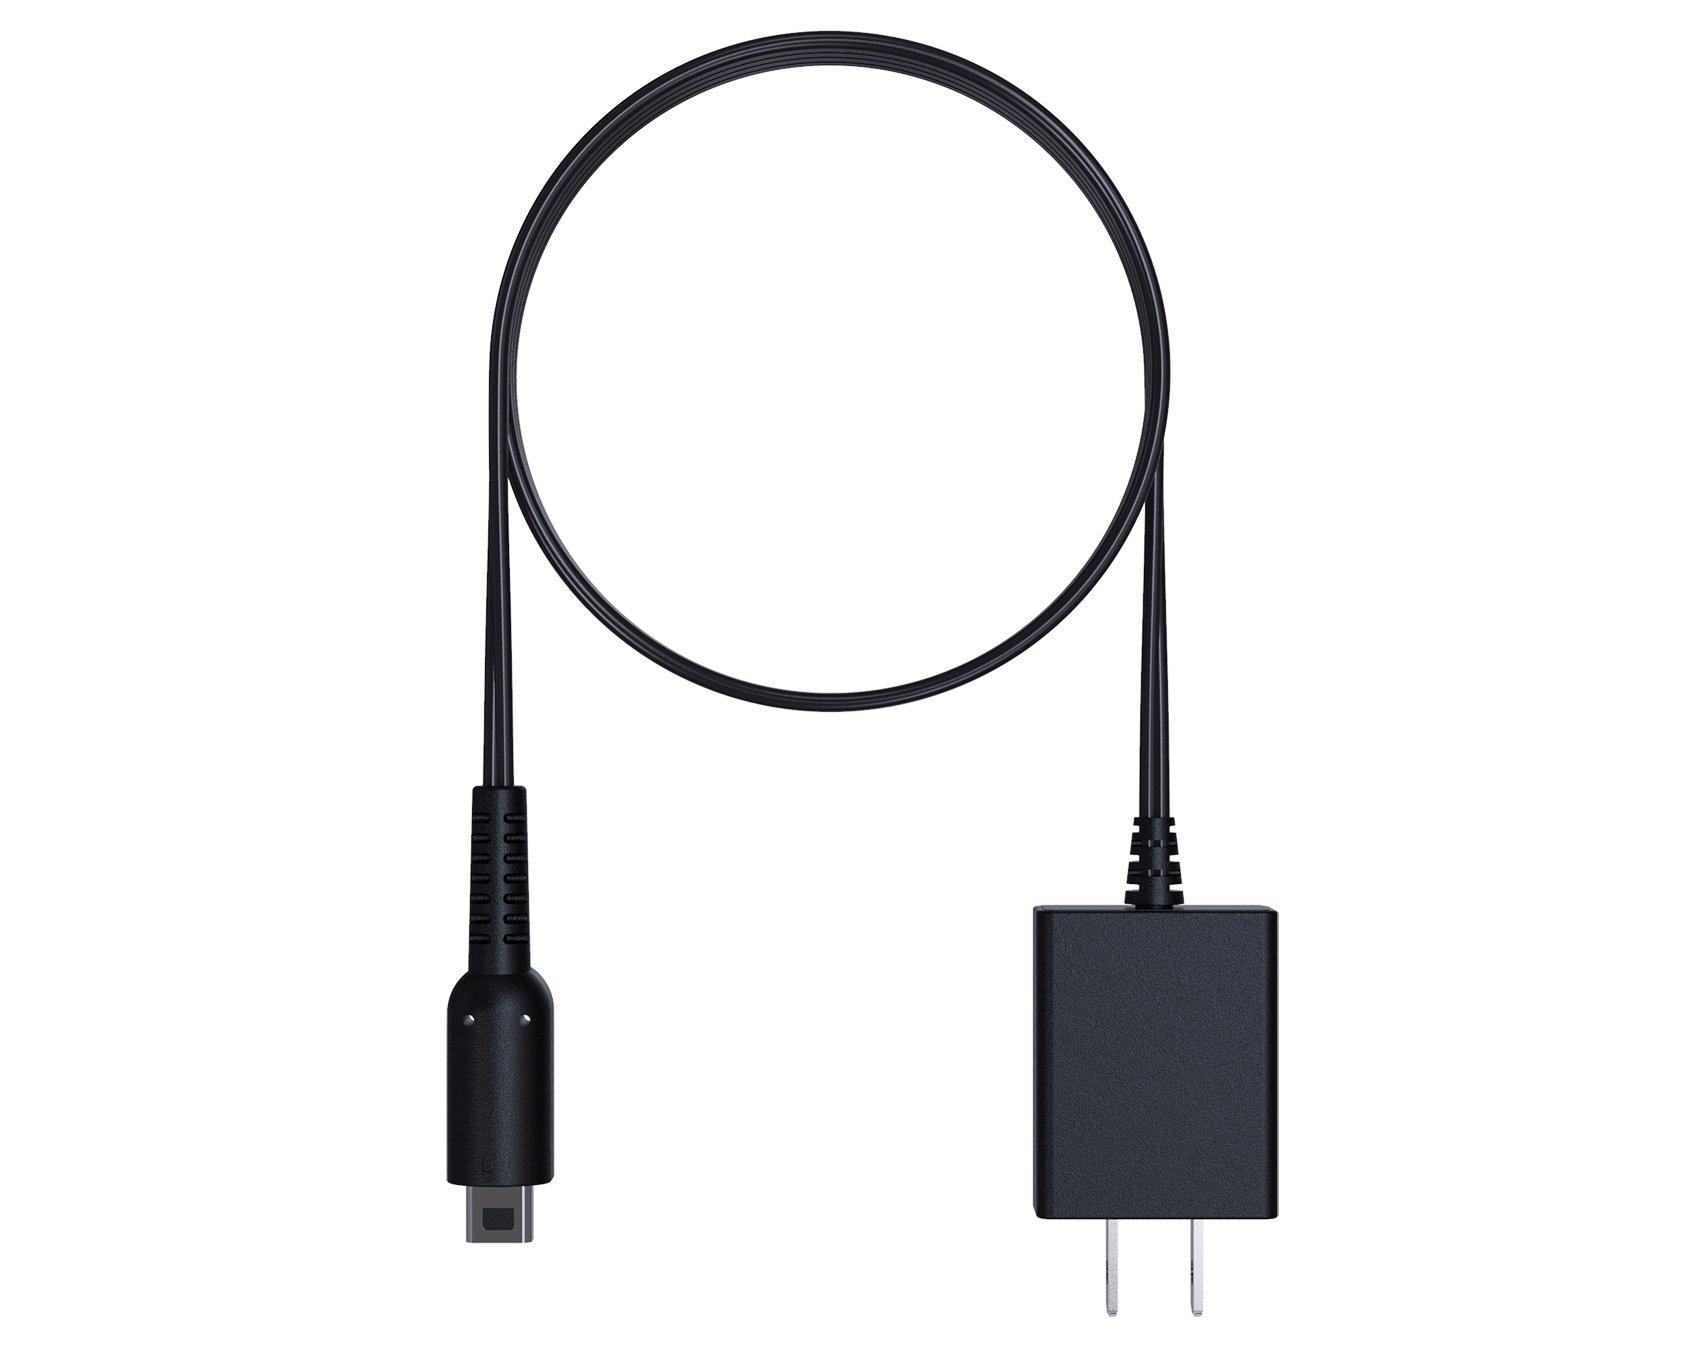 YoK AC Adapter for Nintendo 2DS, and DSi | GameStop